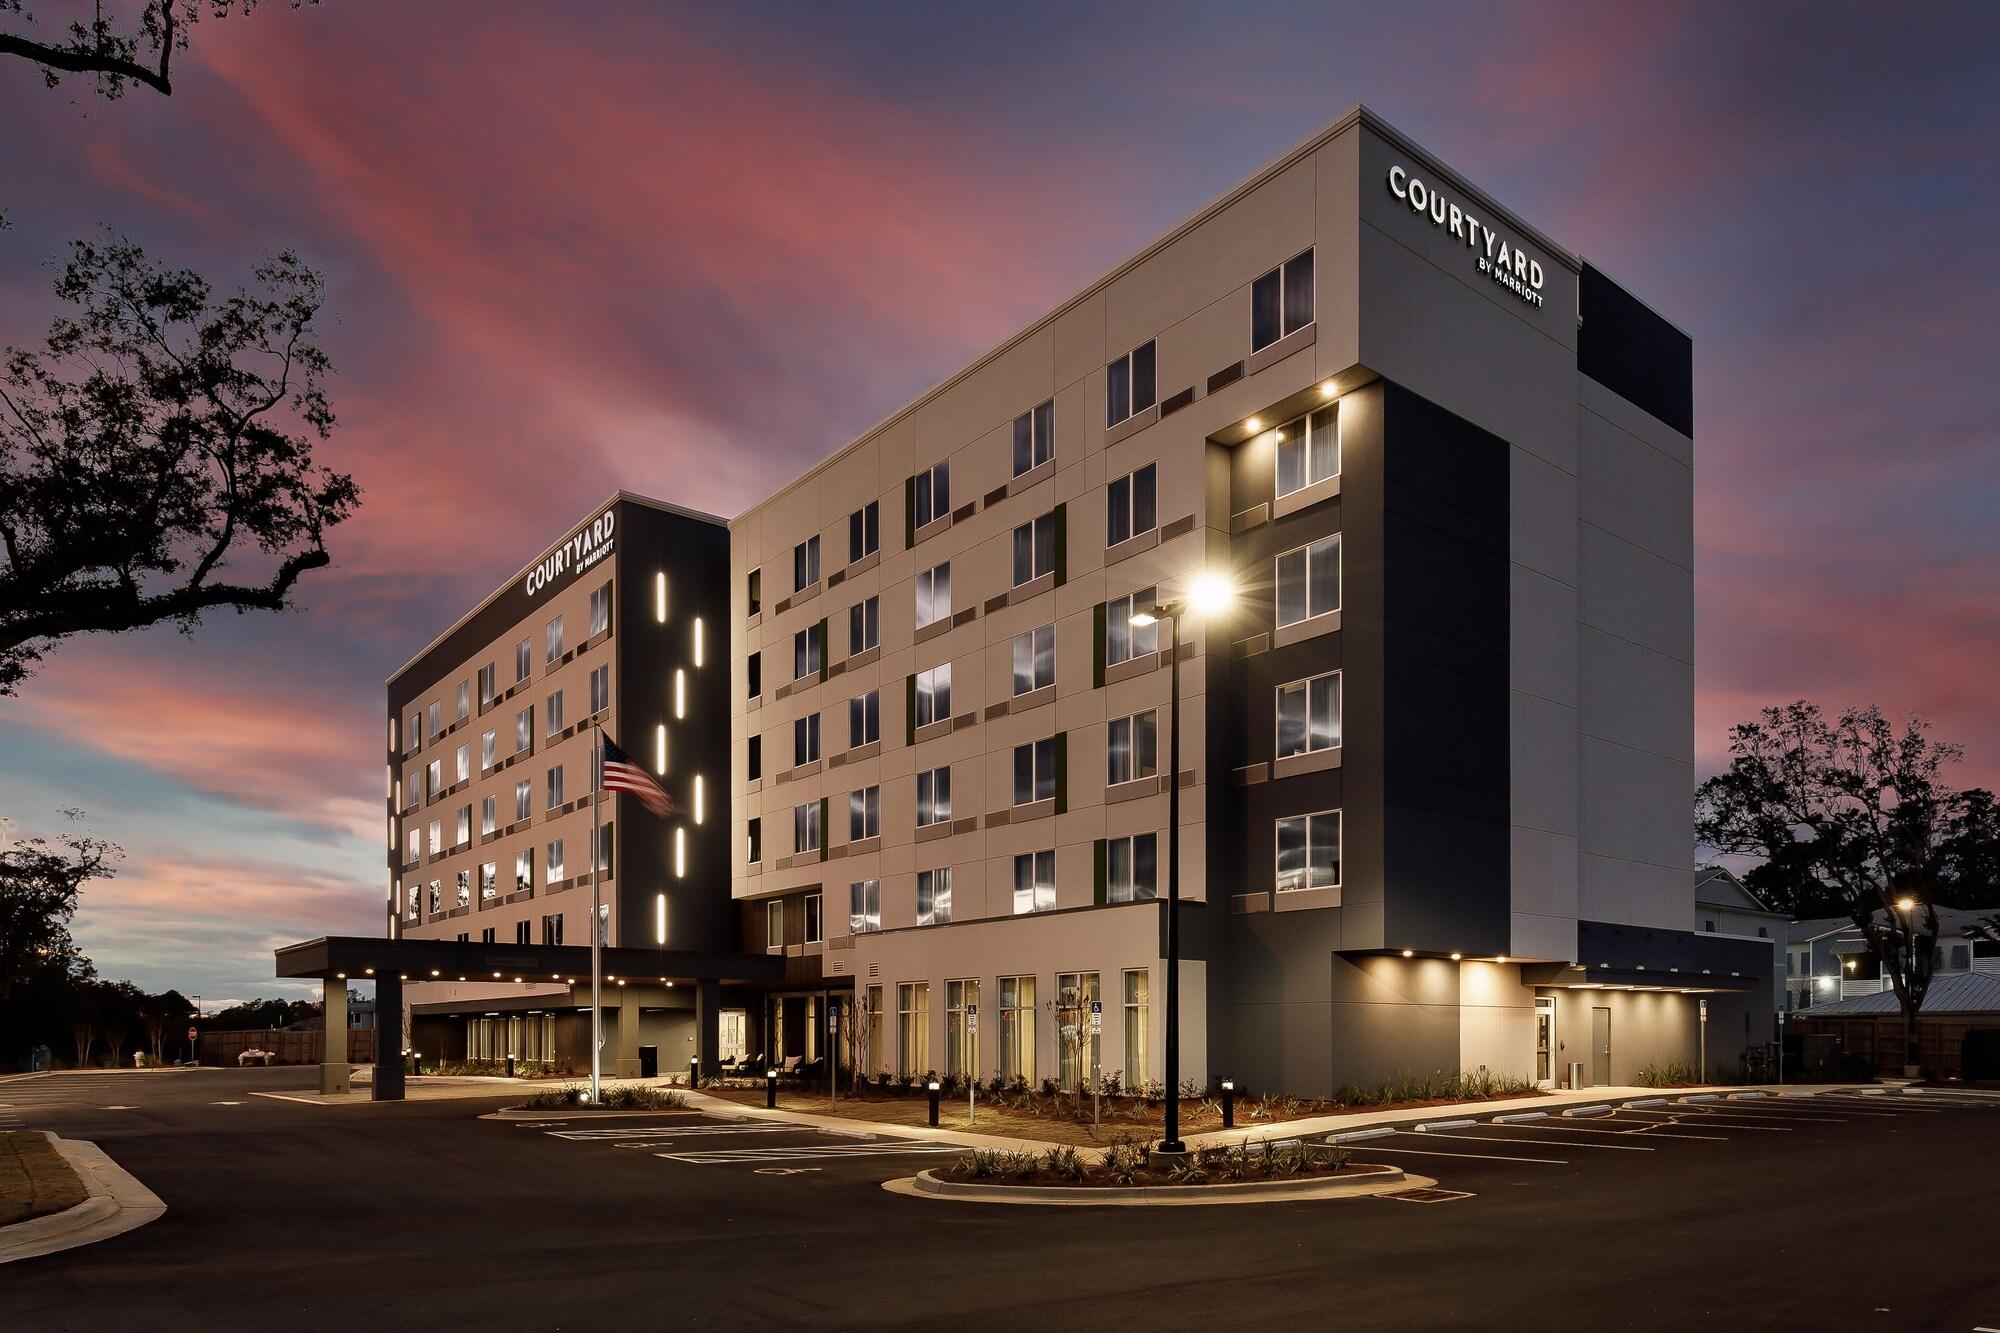 Courtyard by Marriott Pensacola West image